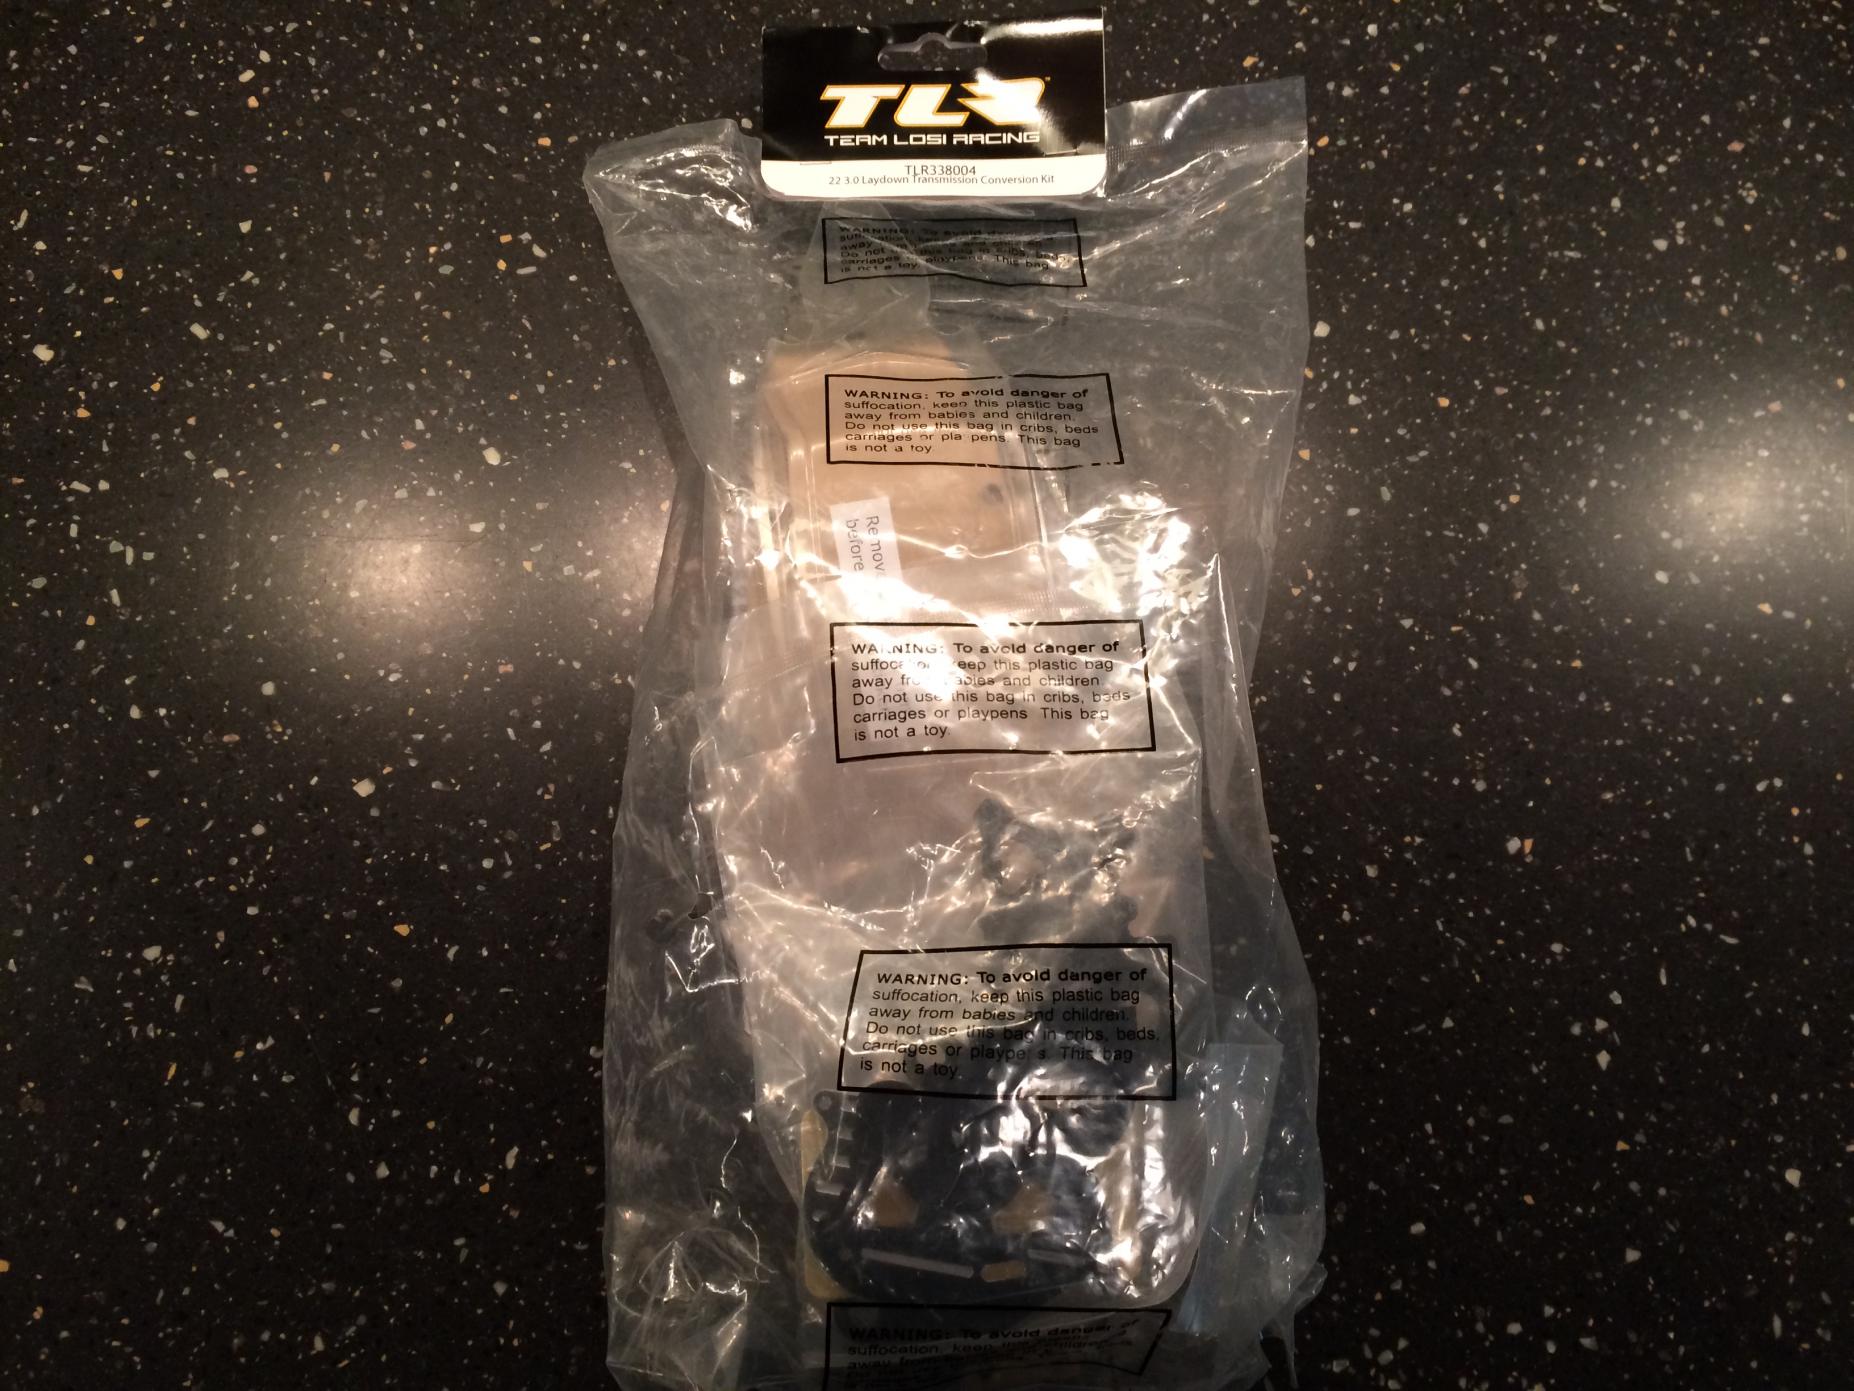 Tlr 338004 laydown kit new in package - R/C Tech Forums